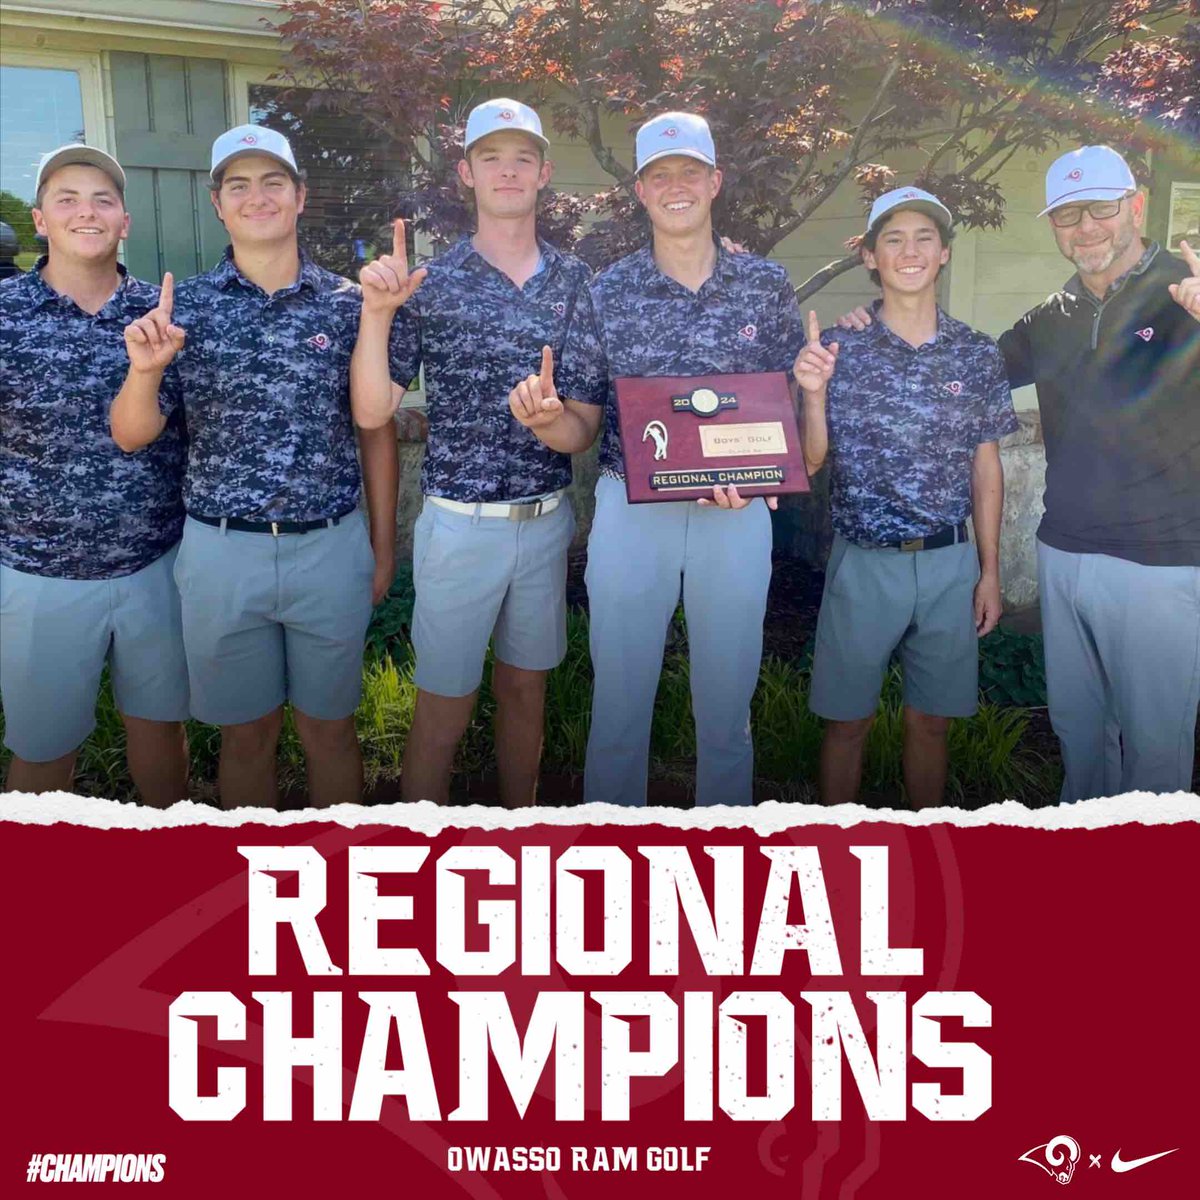 🏆 Regional Champions 🏆 Congratulations to the Owasso Ram Golf team on their first place finish in the regional tournament! Individually, Cameron Cheek and Ben Field tied for 2nd and Ian Wilcoxen tied for 4th! #CHAMPIONS | #RamPride